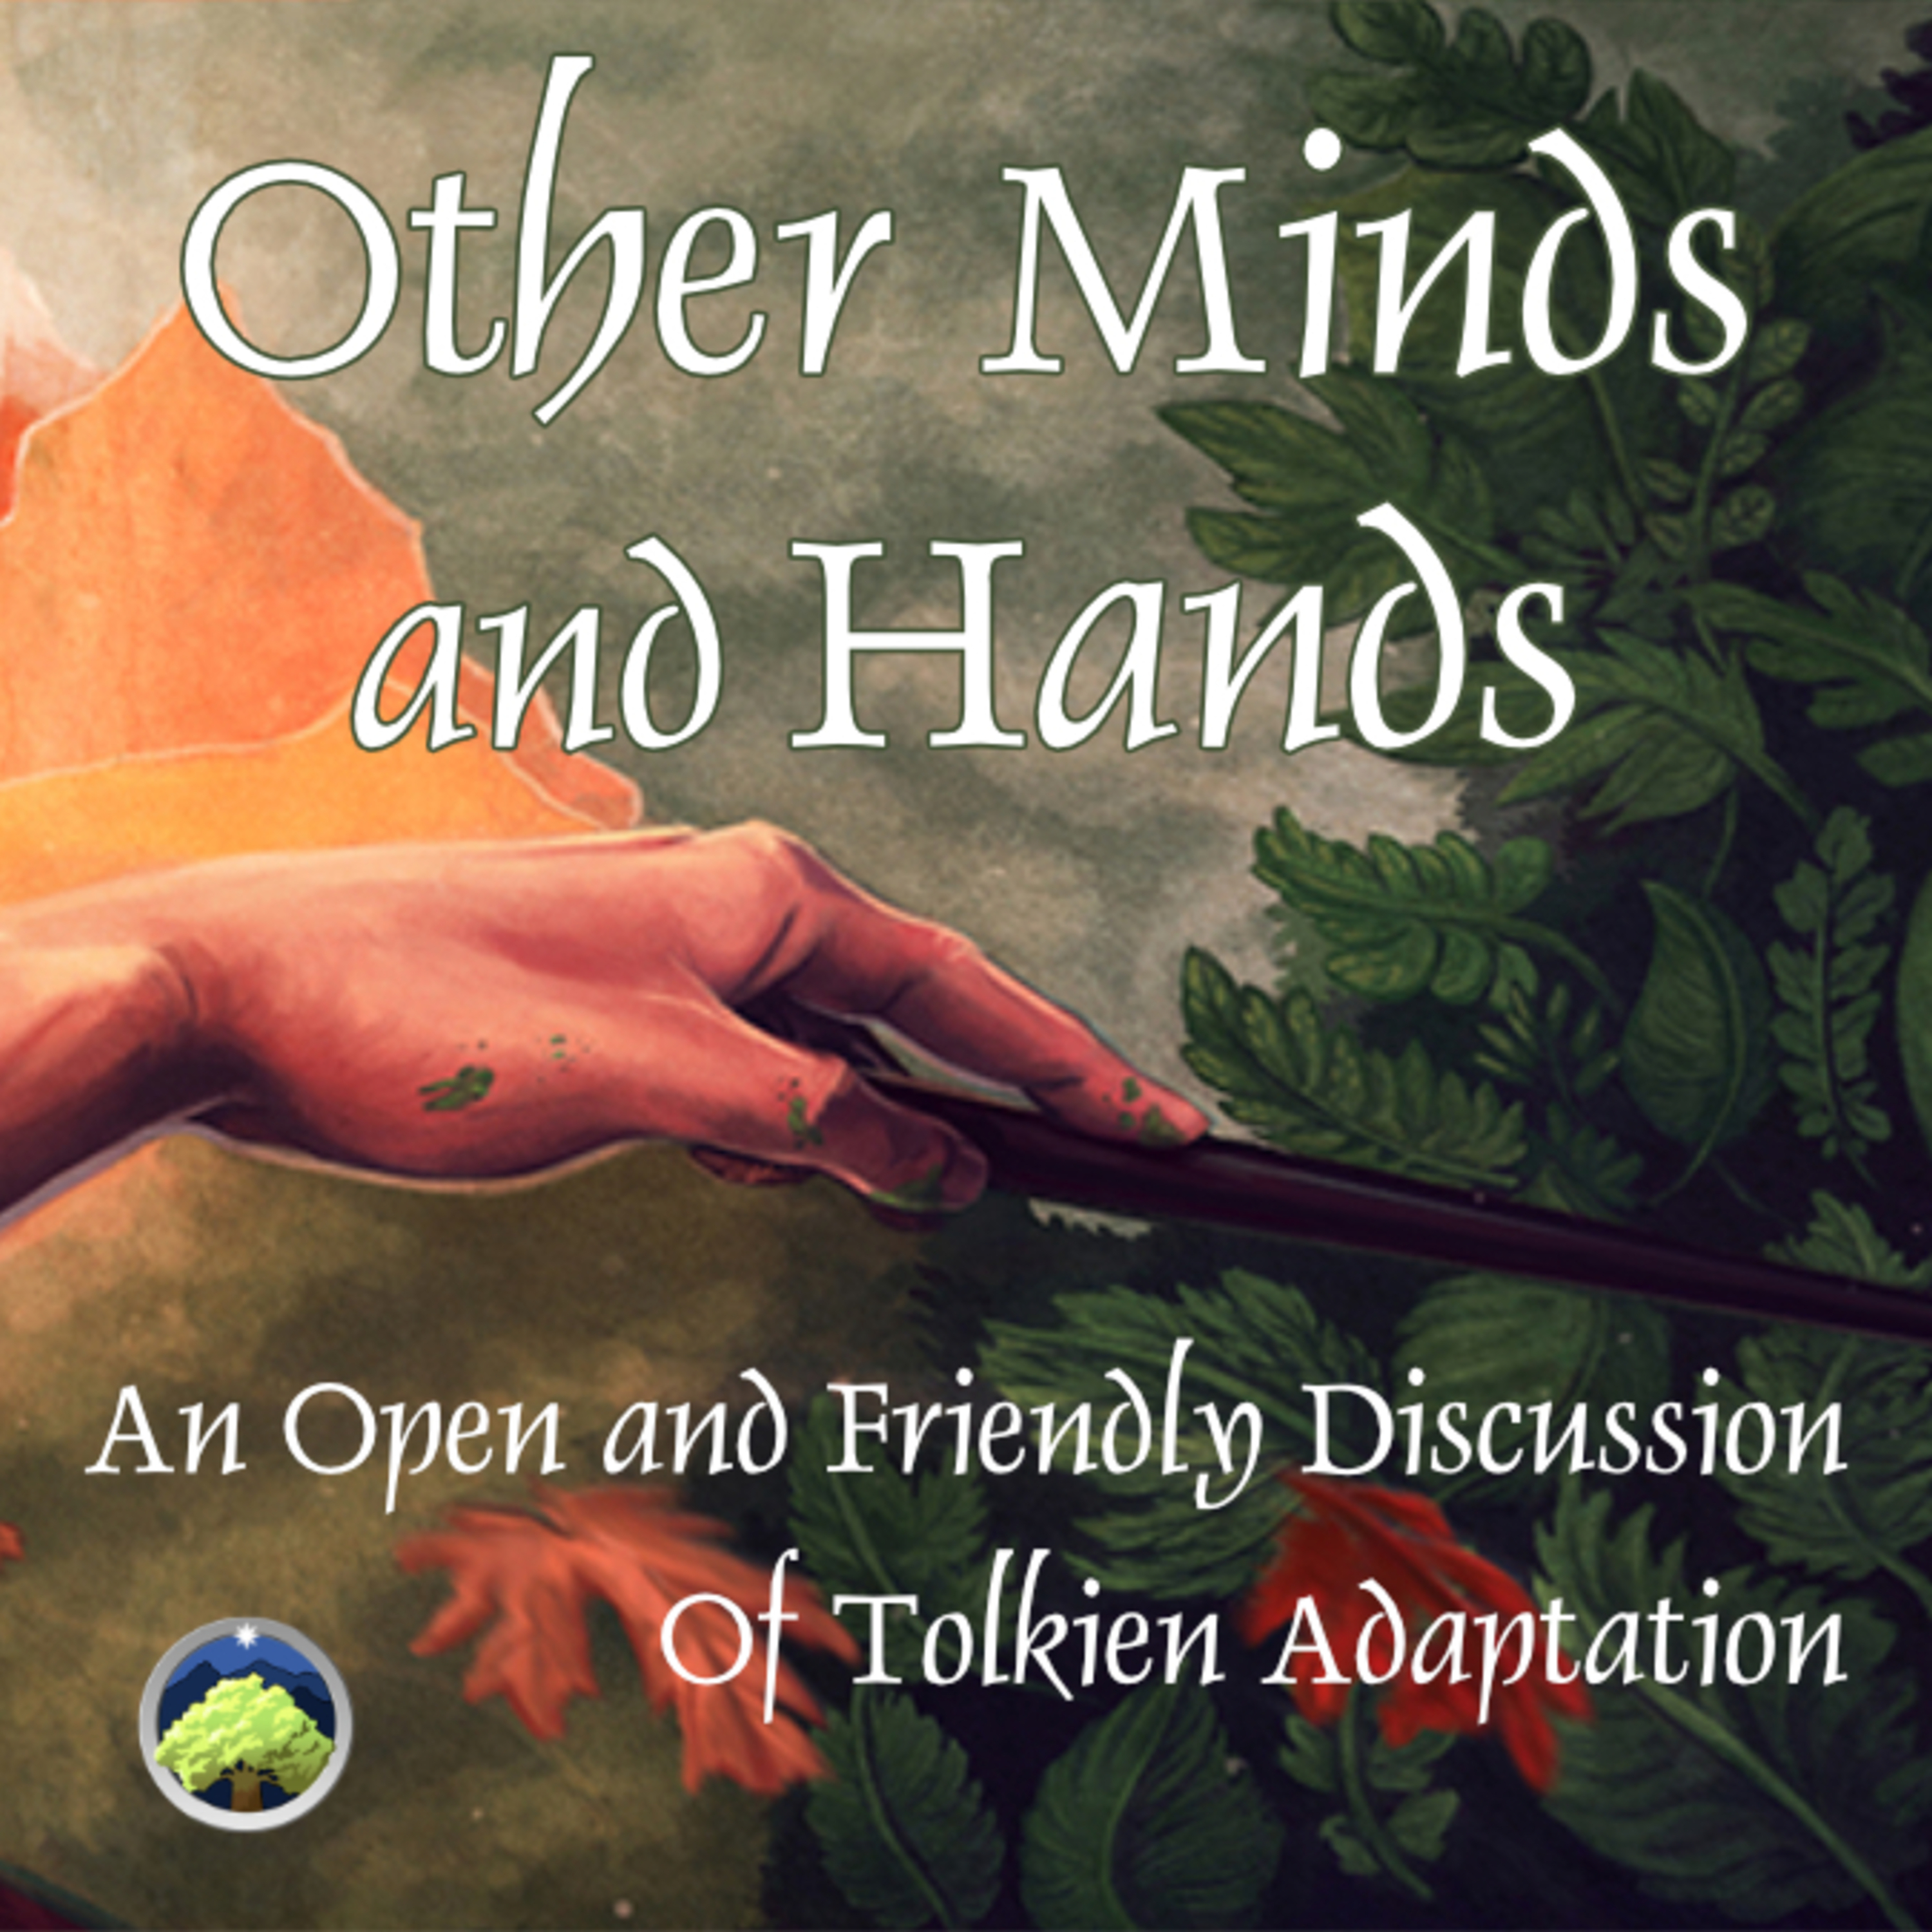 542: Other Minds and Hands, Episode 52